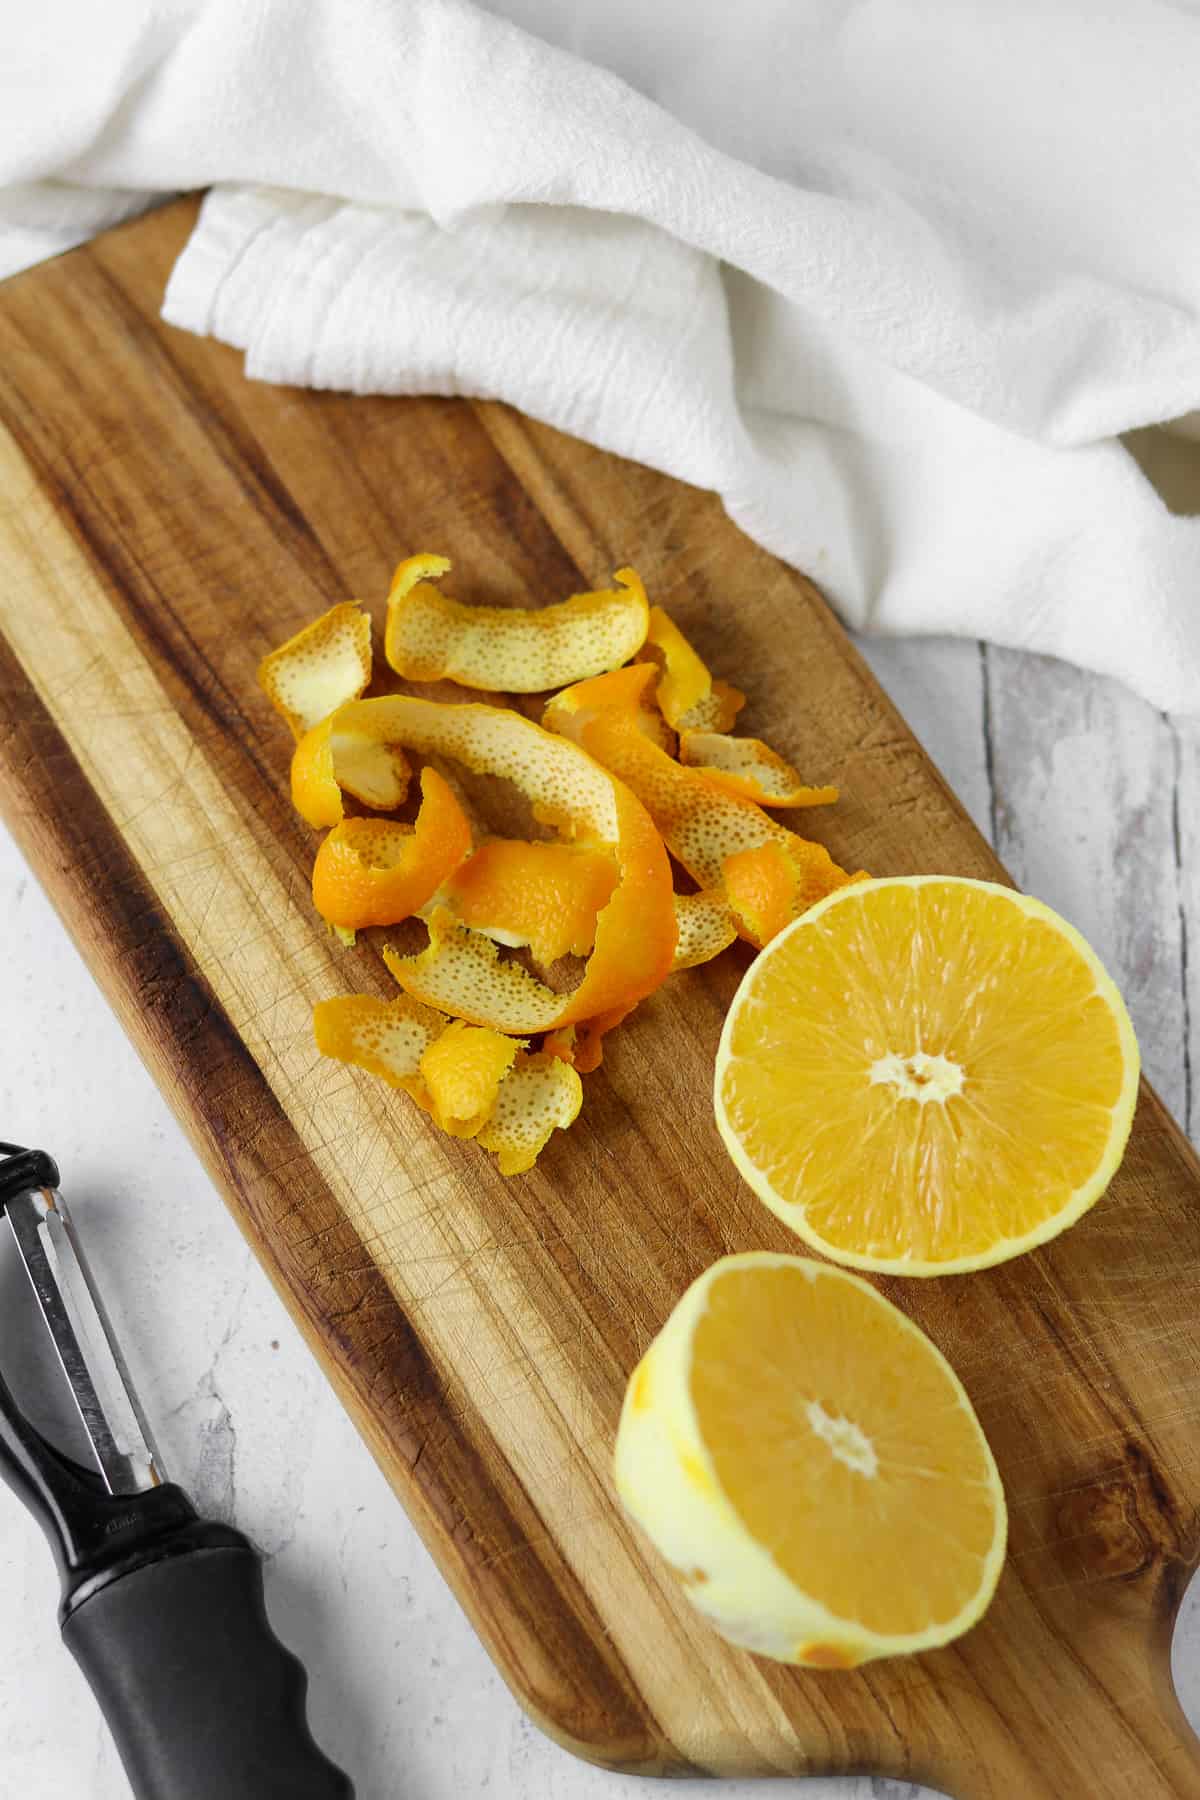 An orange, peeled and cut in half on a wooden cutting board next to a peeler and a towel.